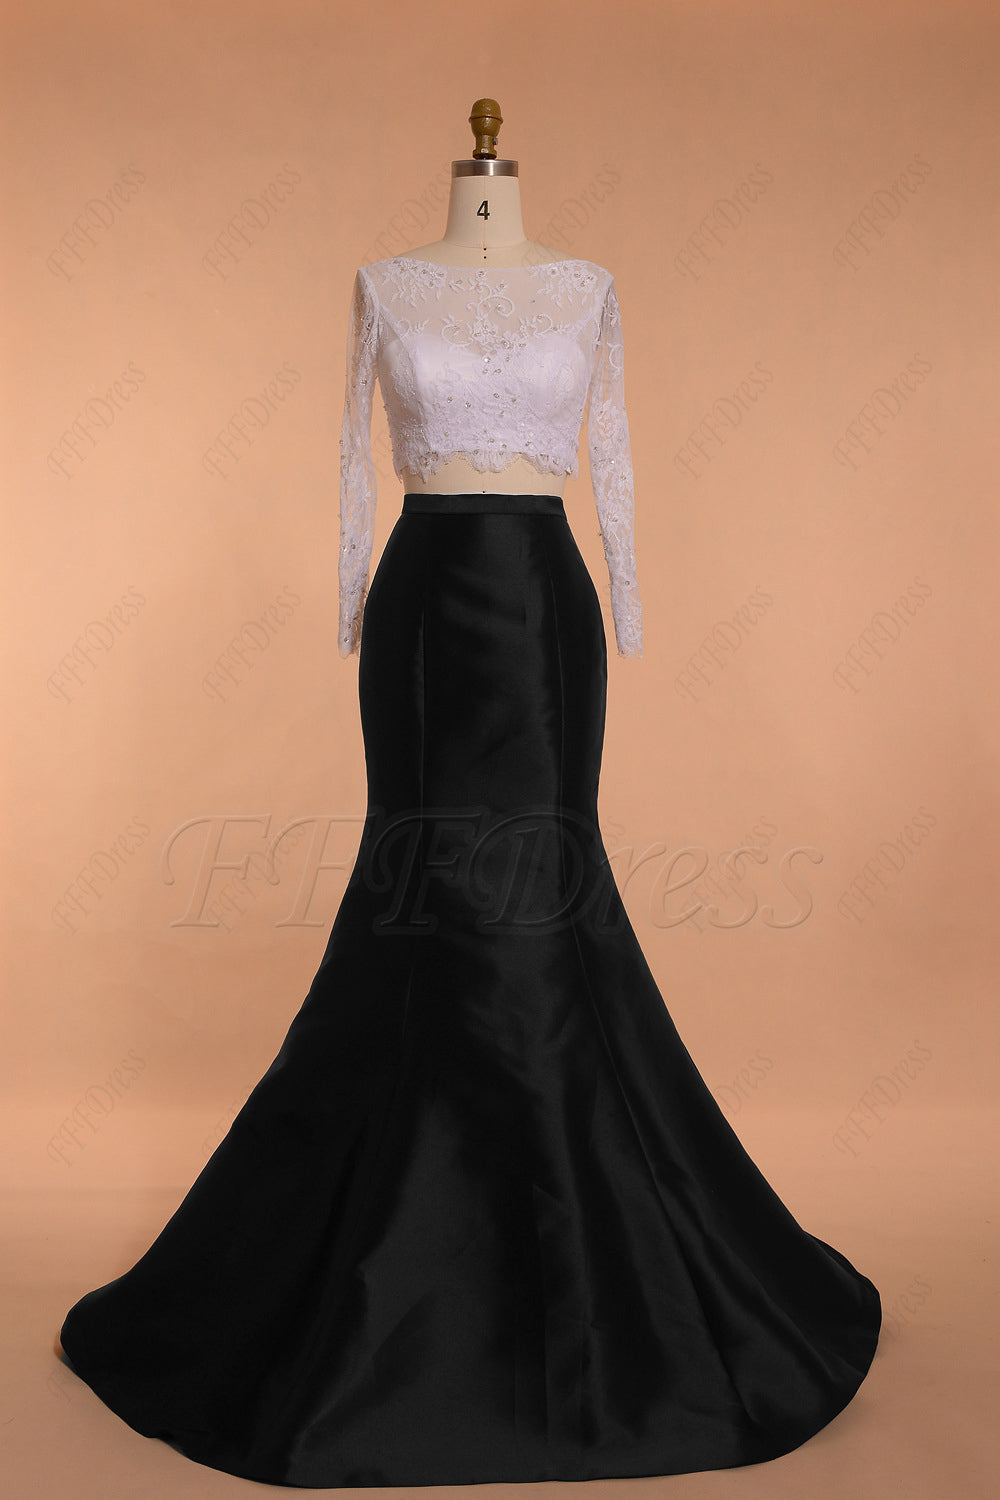 Mermaid Black and White Two Piece Prom Dress Long